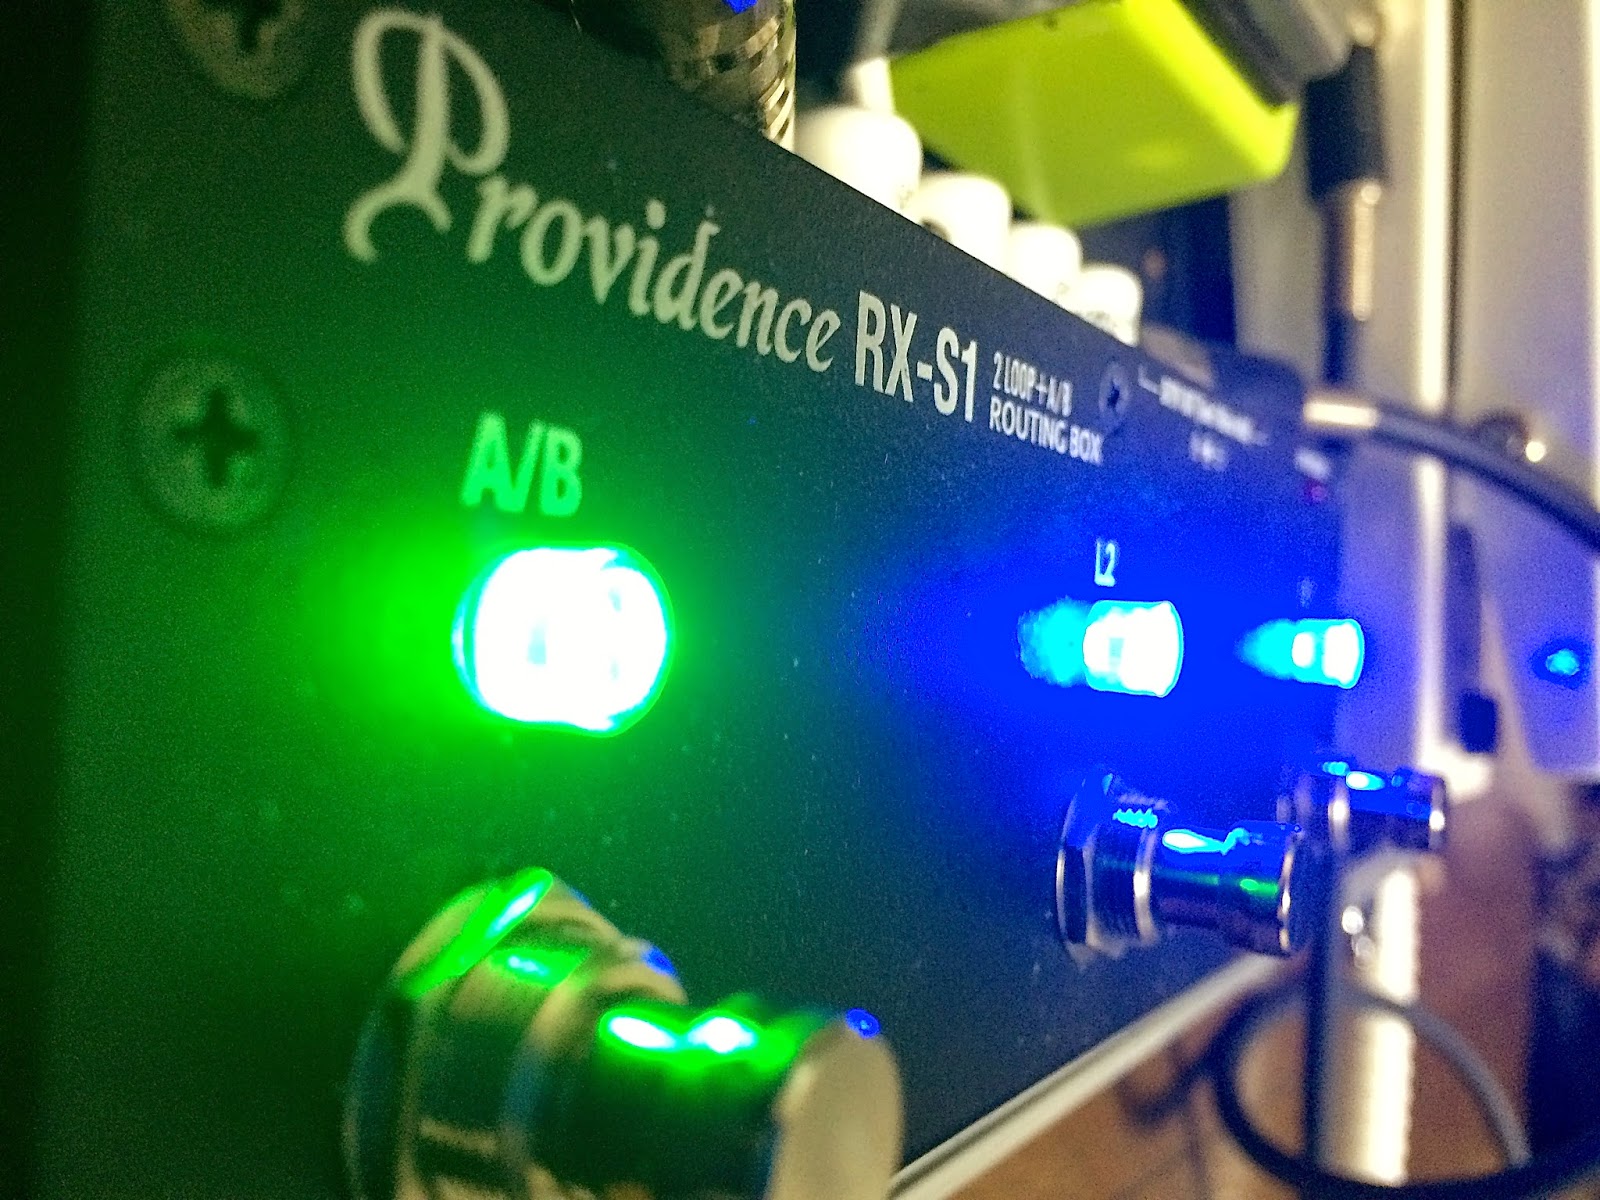 PROVIDENCE RX-S1 2ループスイッチャー+A/Bセレクター